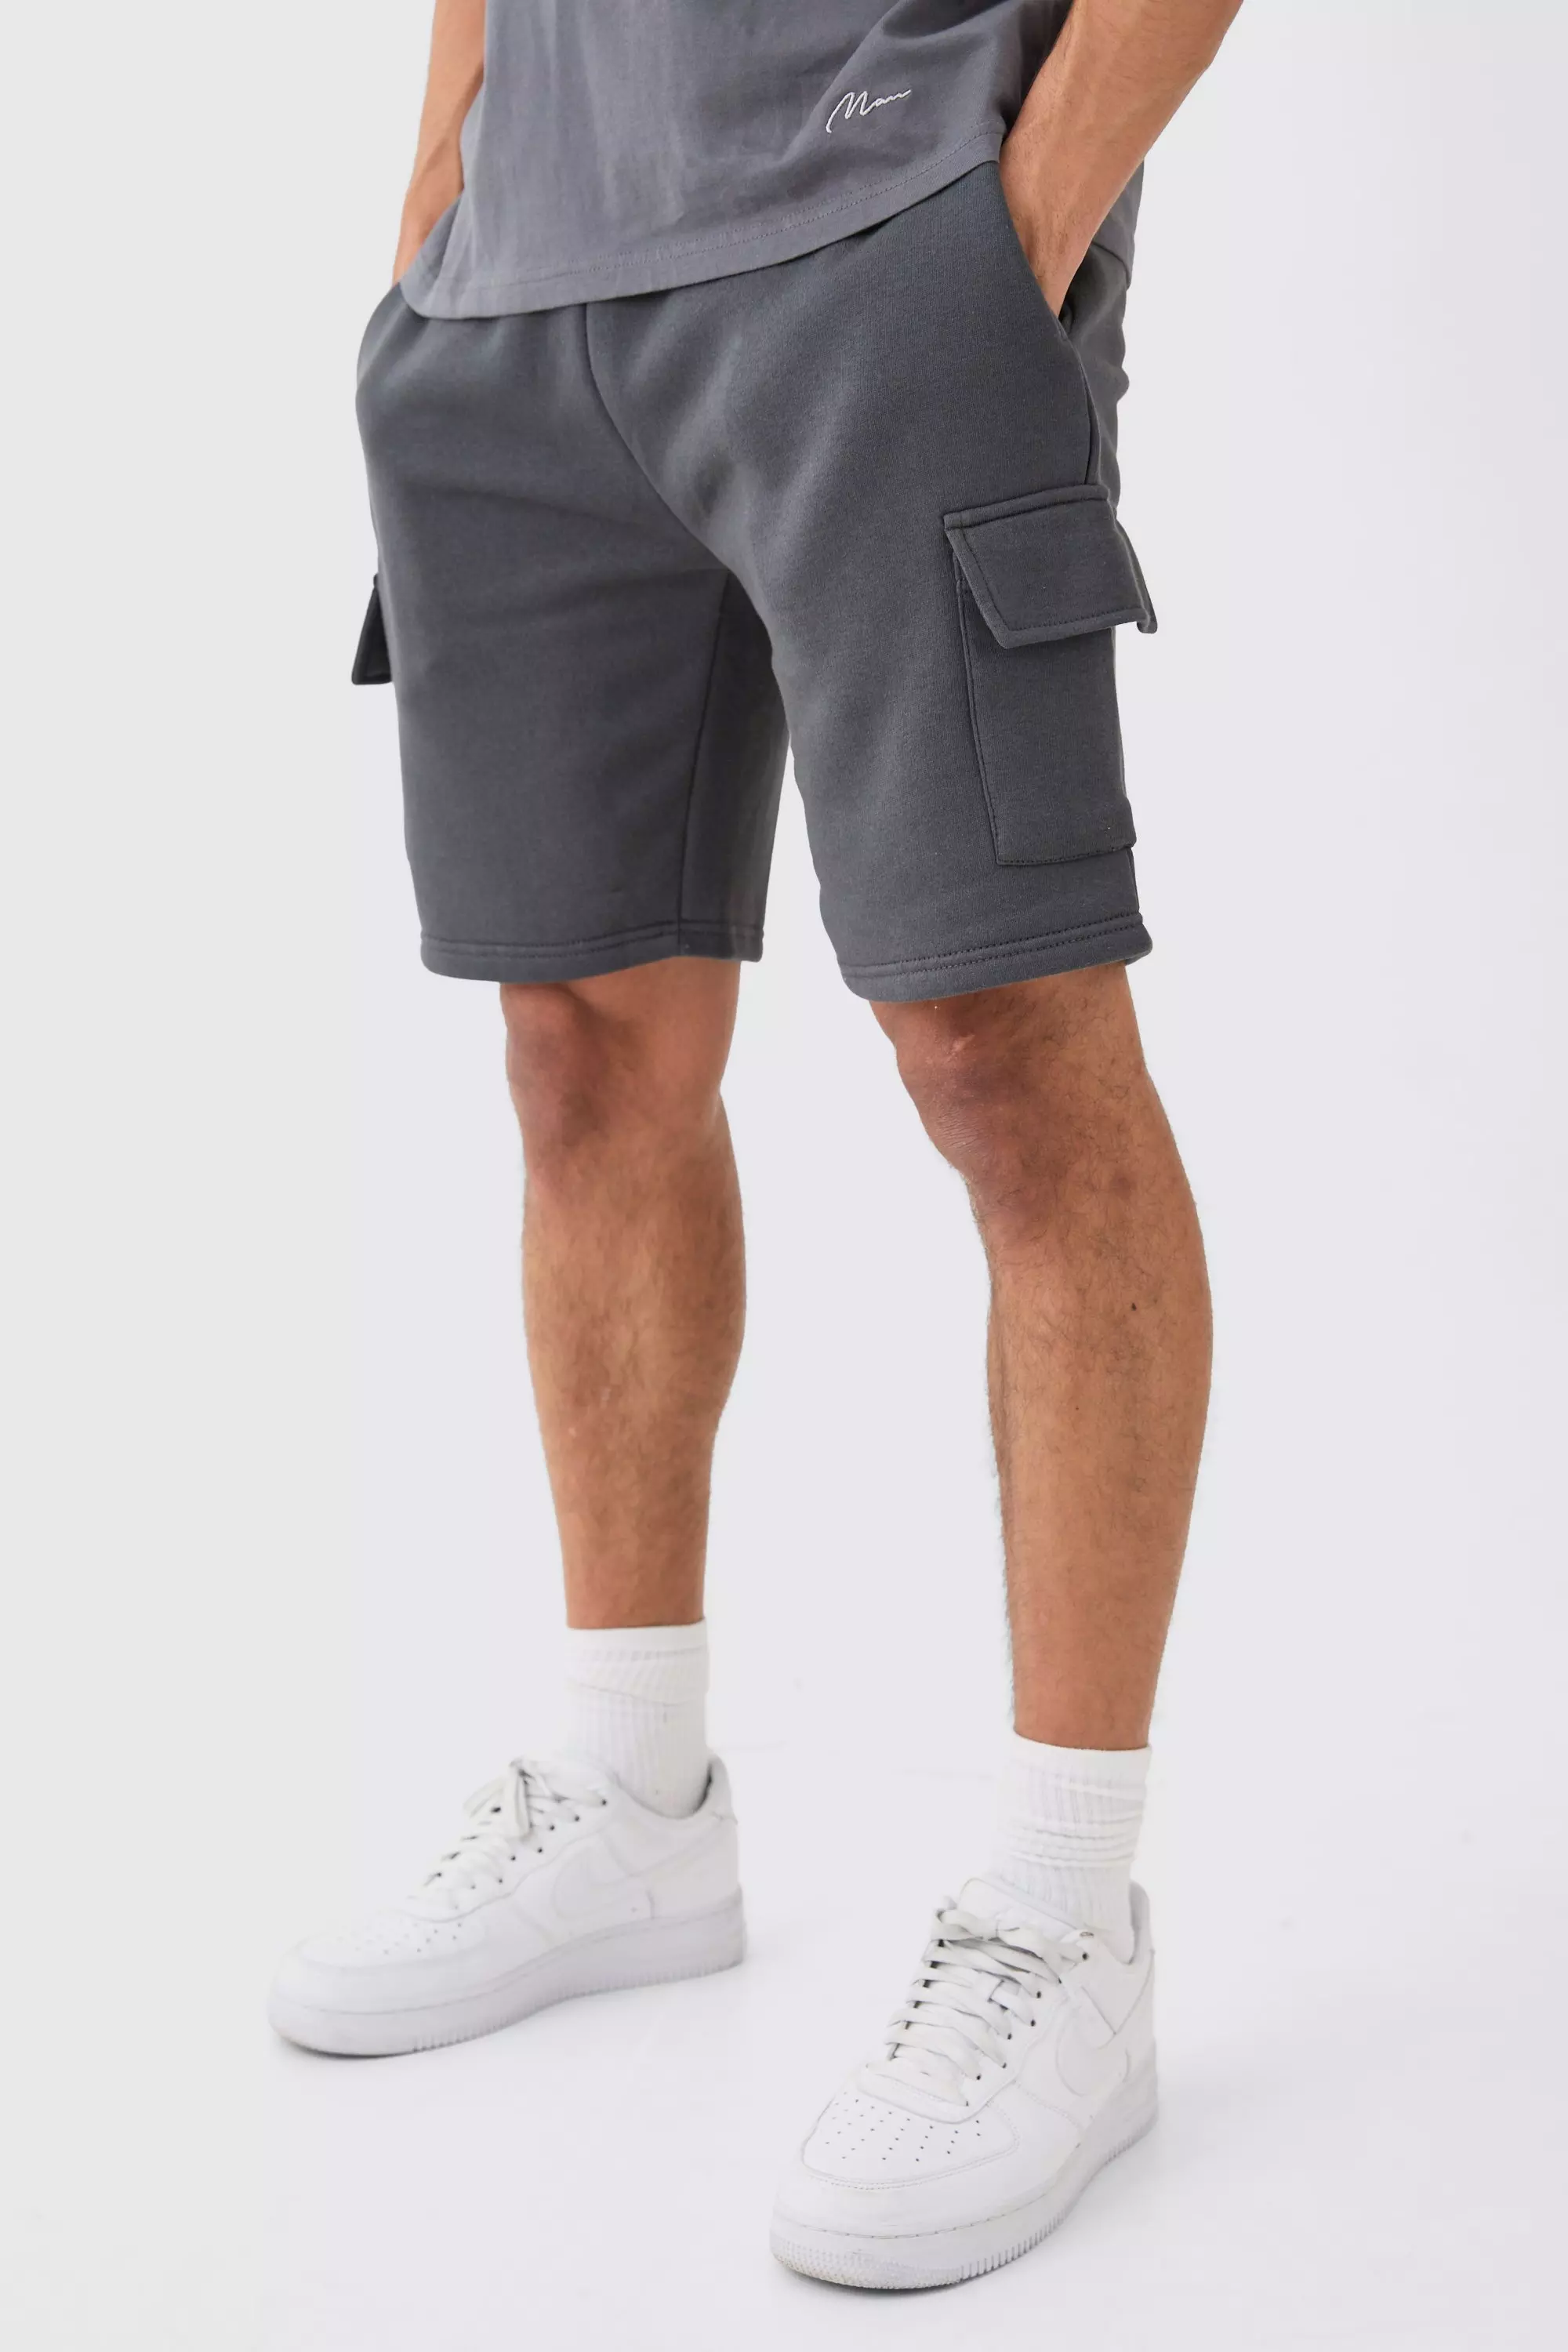 Loose Fit Mid Length Cargo Short Charcoal